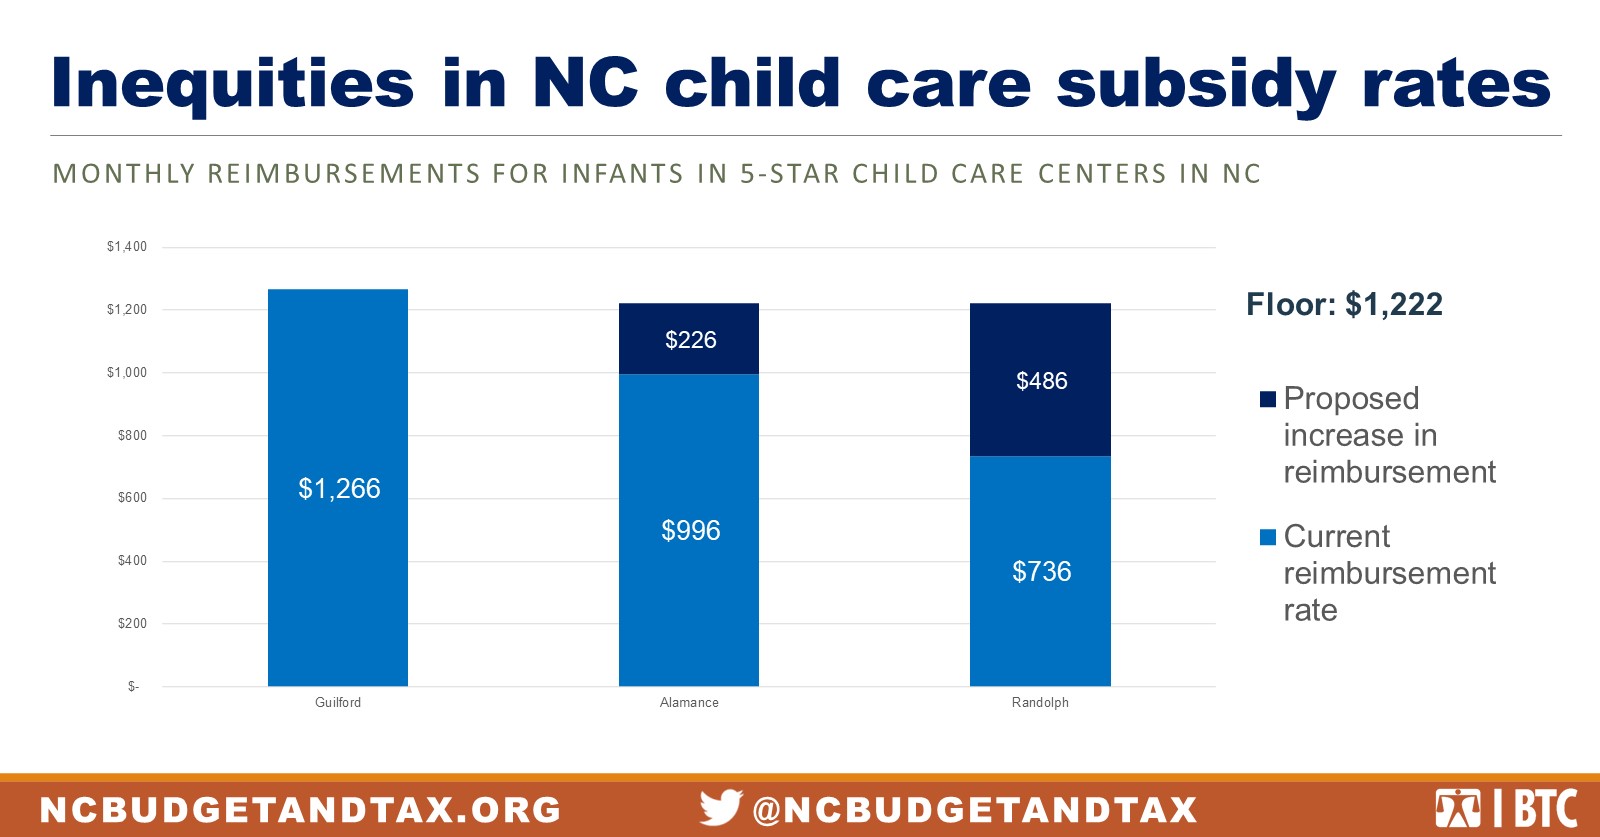 Figure 1: Monthly reimbursements for infants in 5-star child care centers